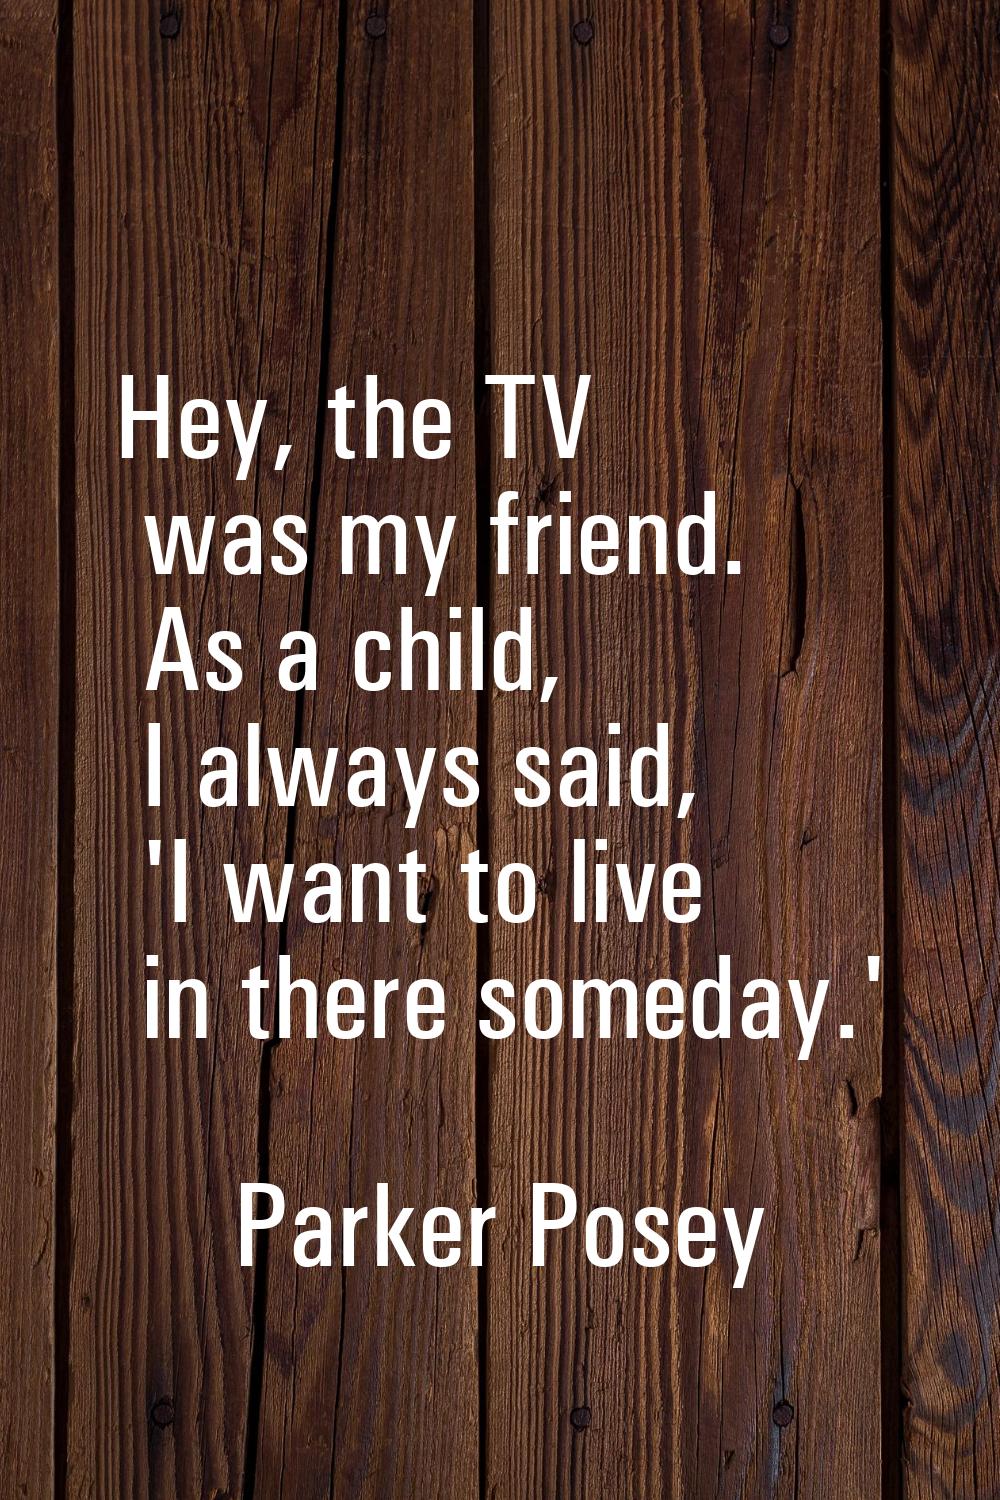 Hey, the TV was my friend. As a child, I always said, 'I want to live in there someday.'